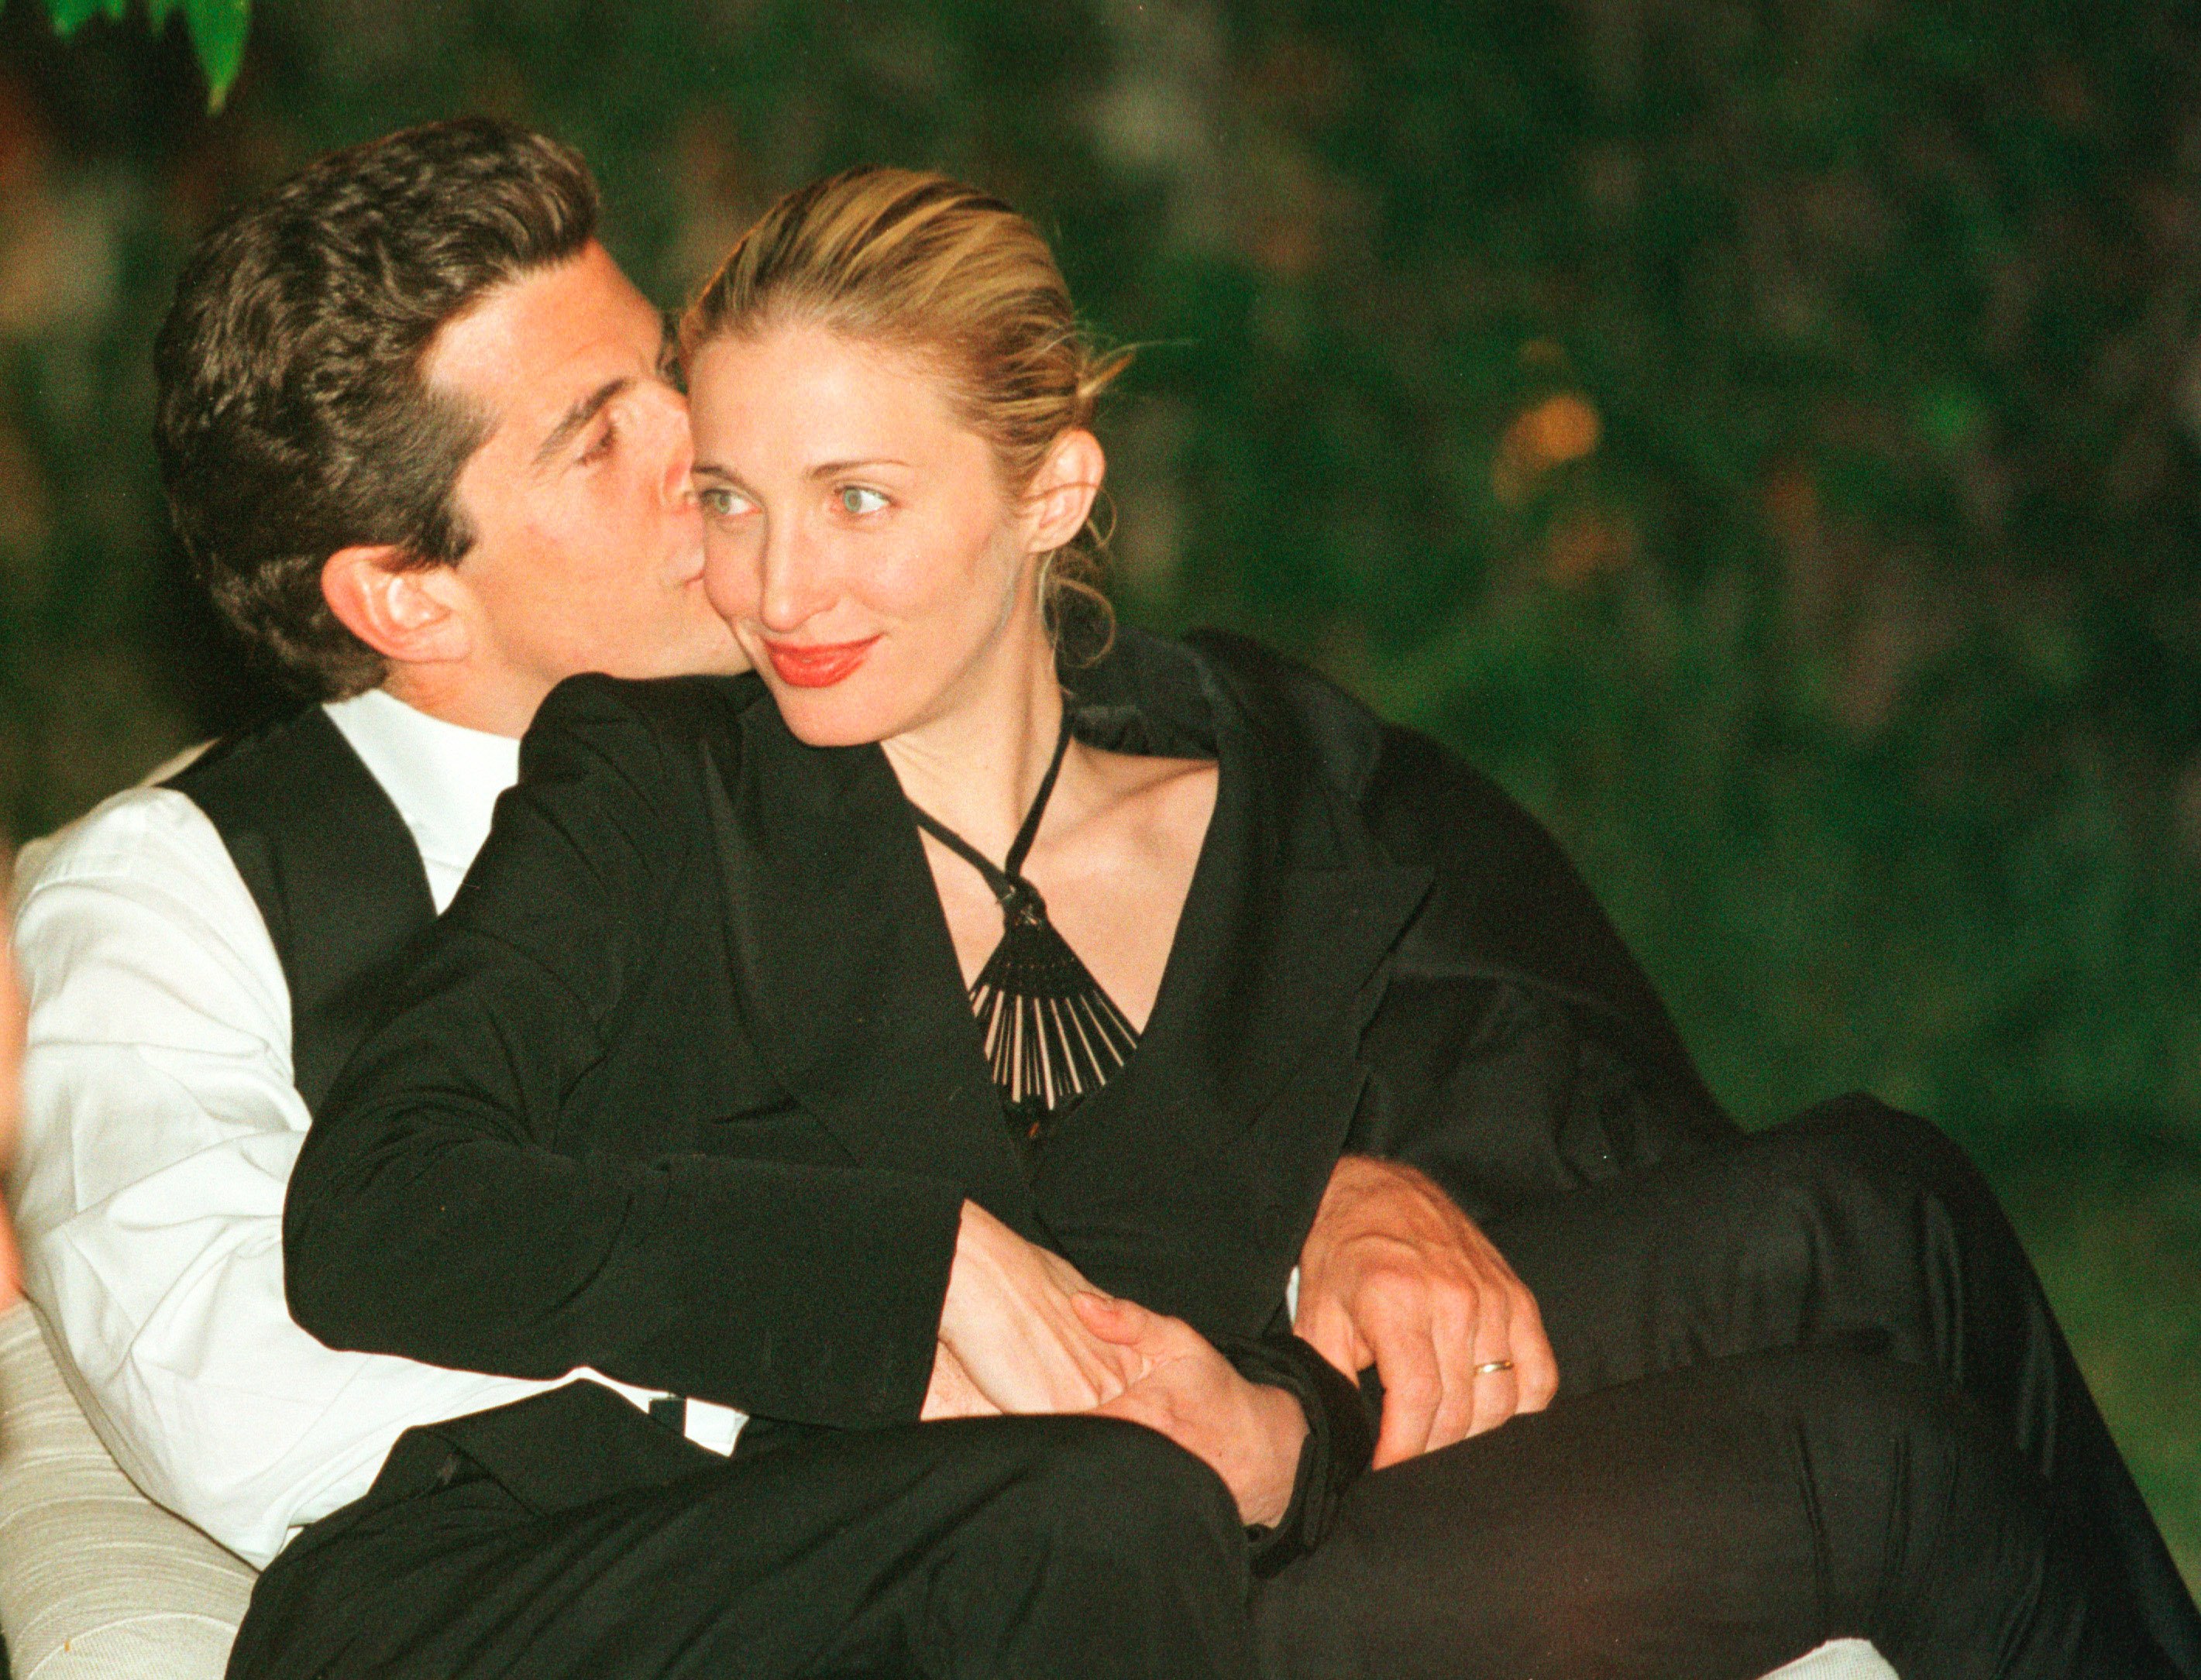 John F. Kennedy, Jr. gives his wife Carolyn a kiss on the cheek during the annual White House Correspondents dinner May 1, 1999 in Washington, D.C. | Photo: Getty Images